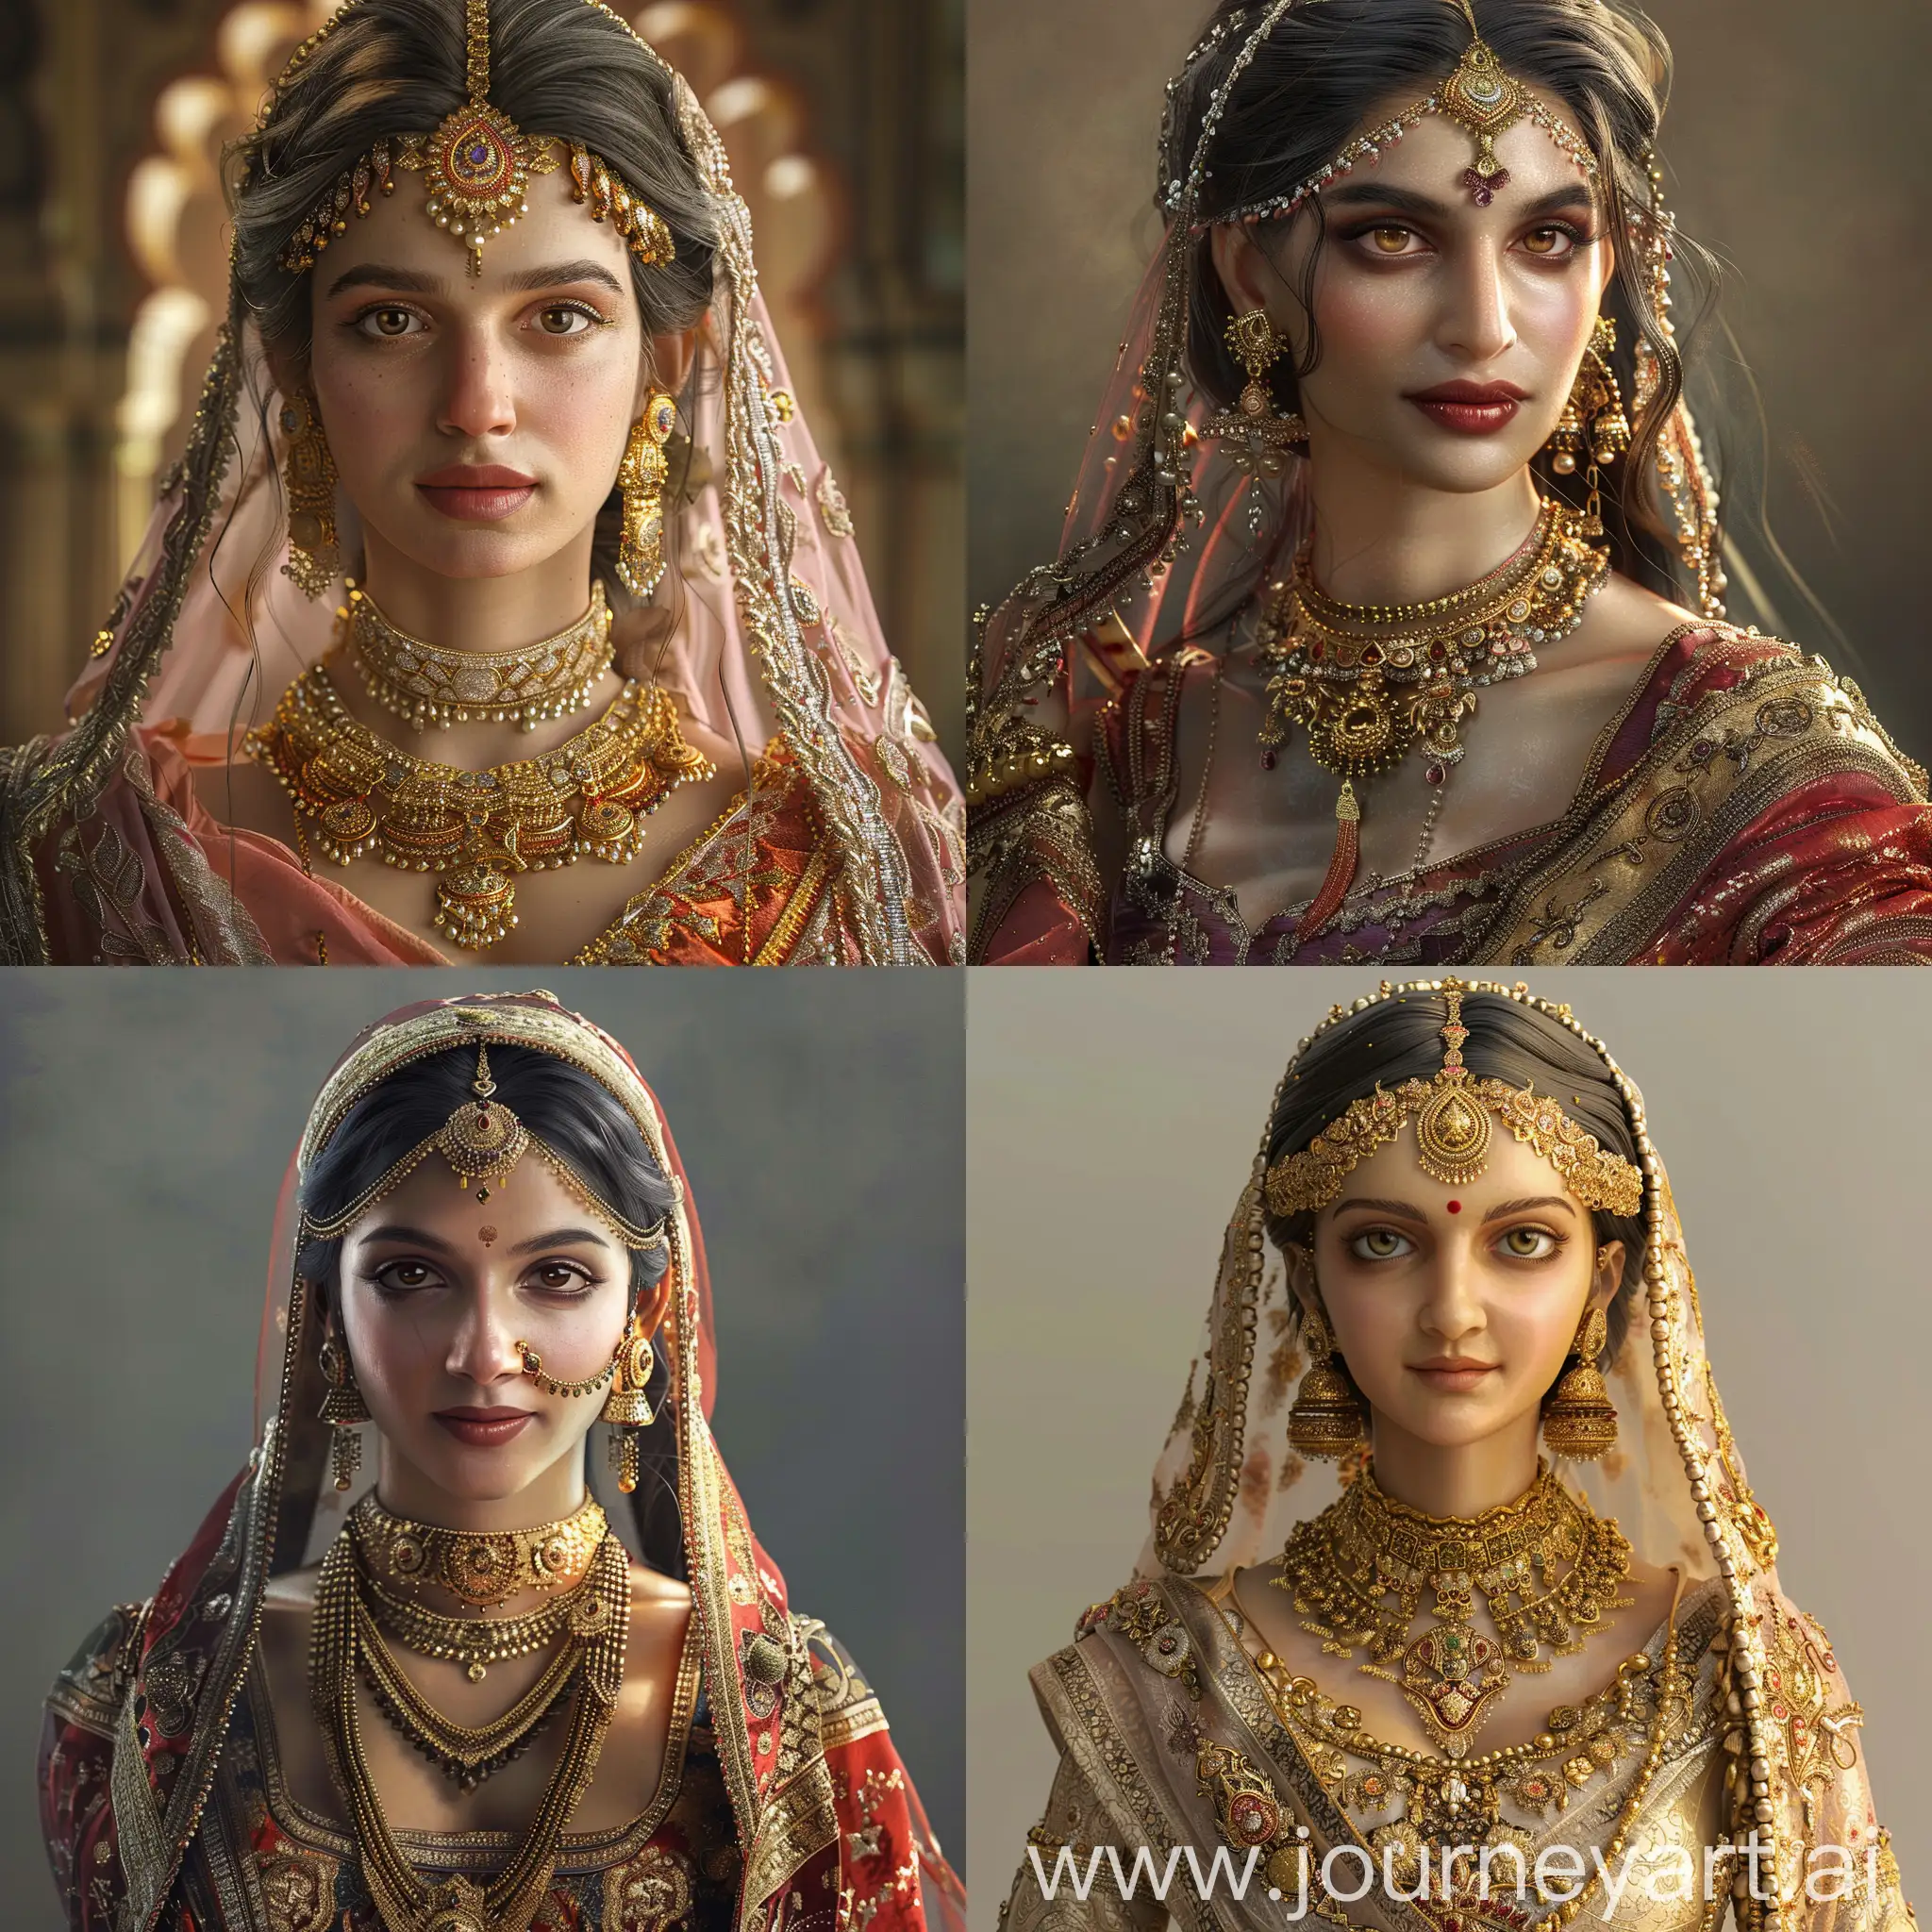 An exquisitely detailed and photorealistic portrayal of Shree Rajput Padmavati that captures her enchanting beauty and grace. She is adorned in luxurious traditional Rajasthani royal attire, embellished with elaborate gold jewelry. Her poise is dignified, reflecting her noble heritage, and her features are rendered with fine attention to capture her legendary allure."